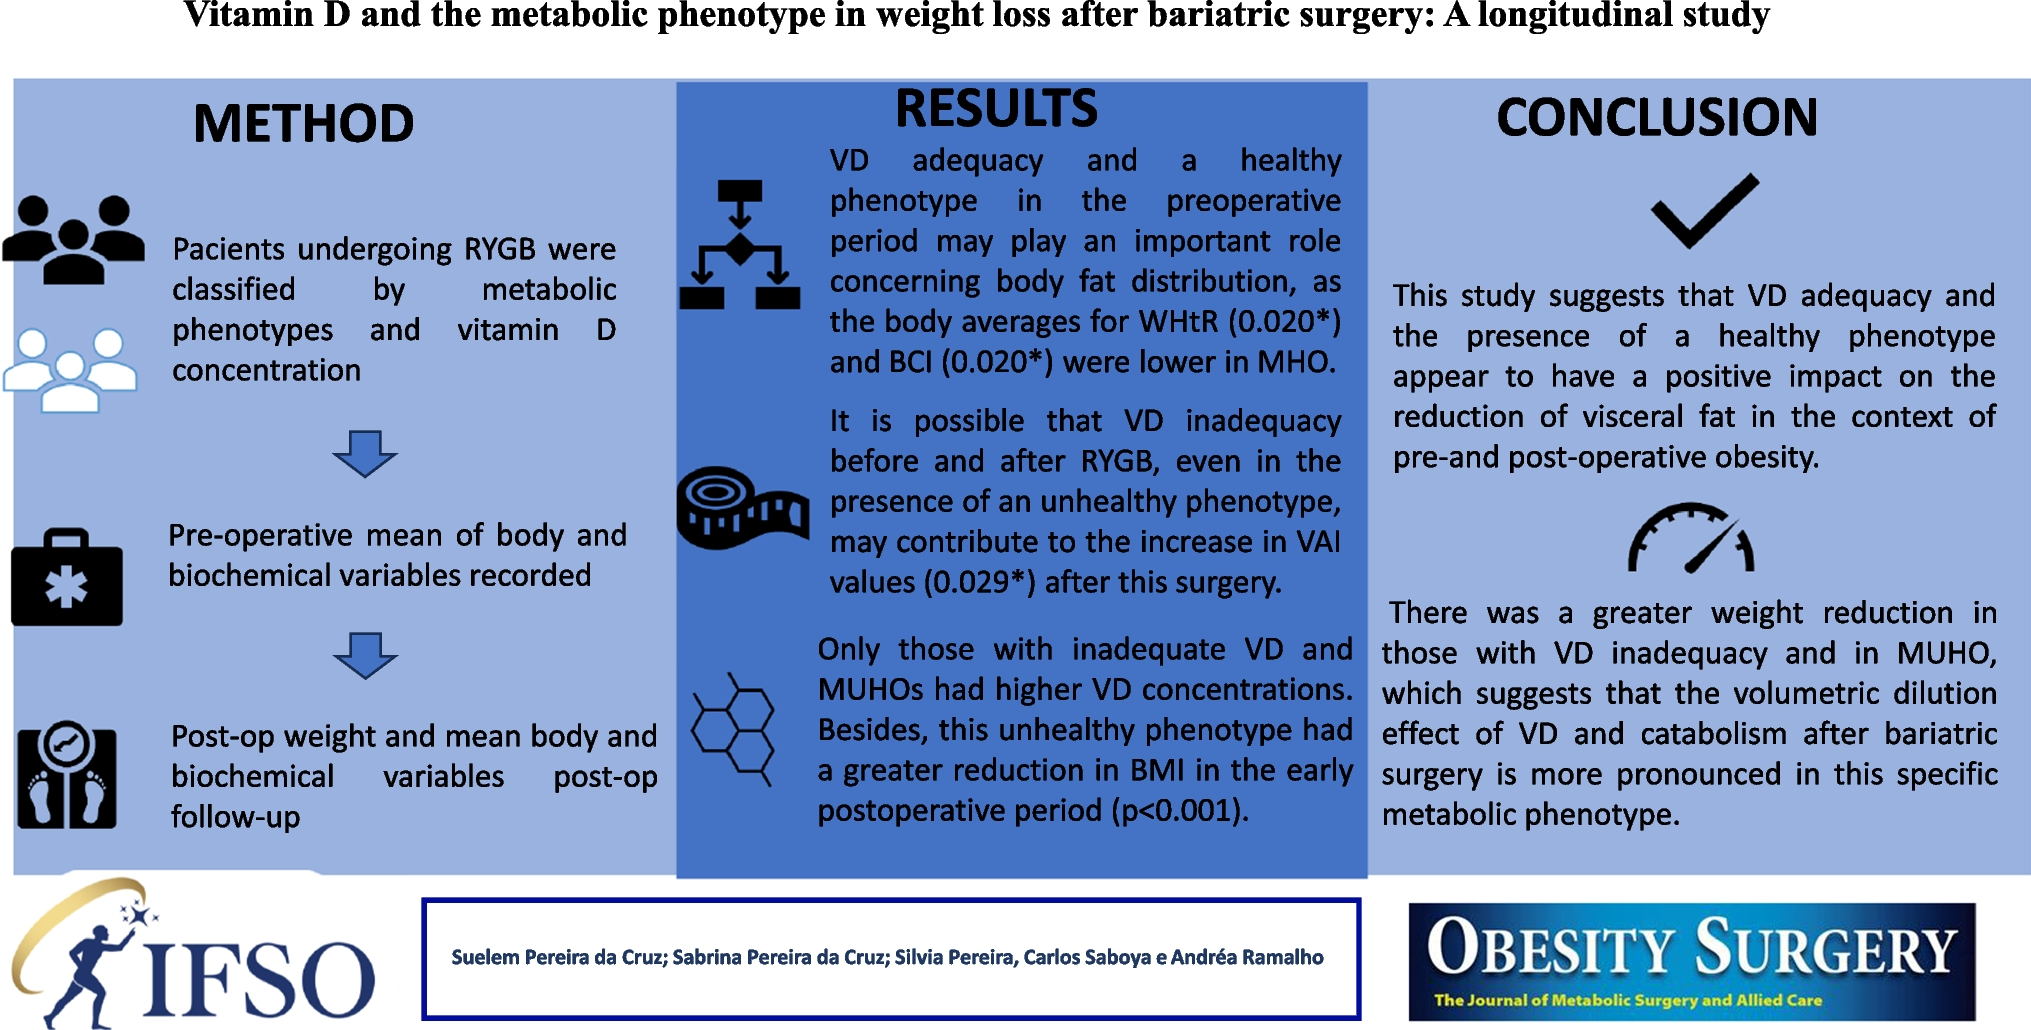 Vitamin D and the Metabolic Phenotype in Weight Loss After Bariatric Surgery: A Longitudinal Study